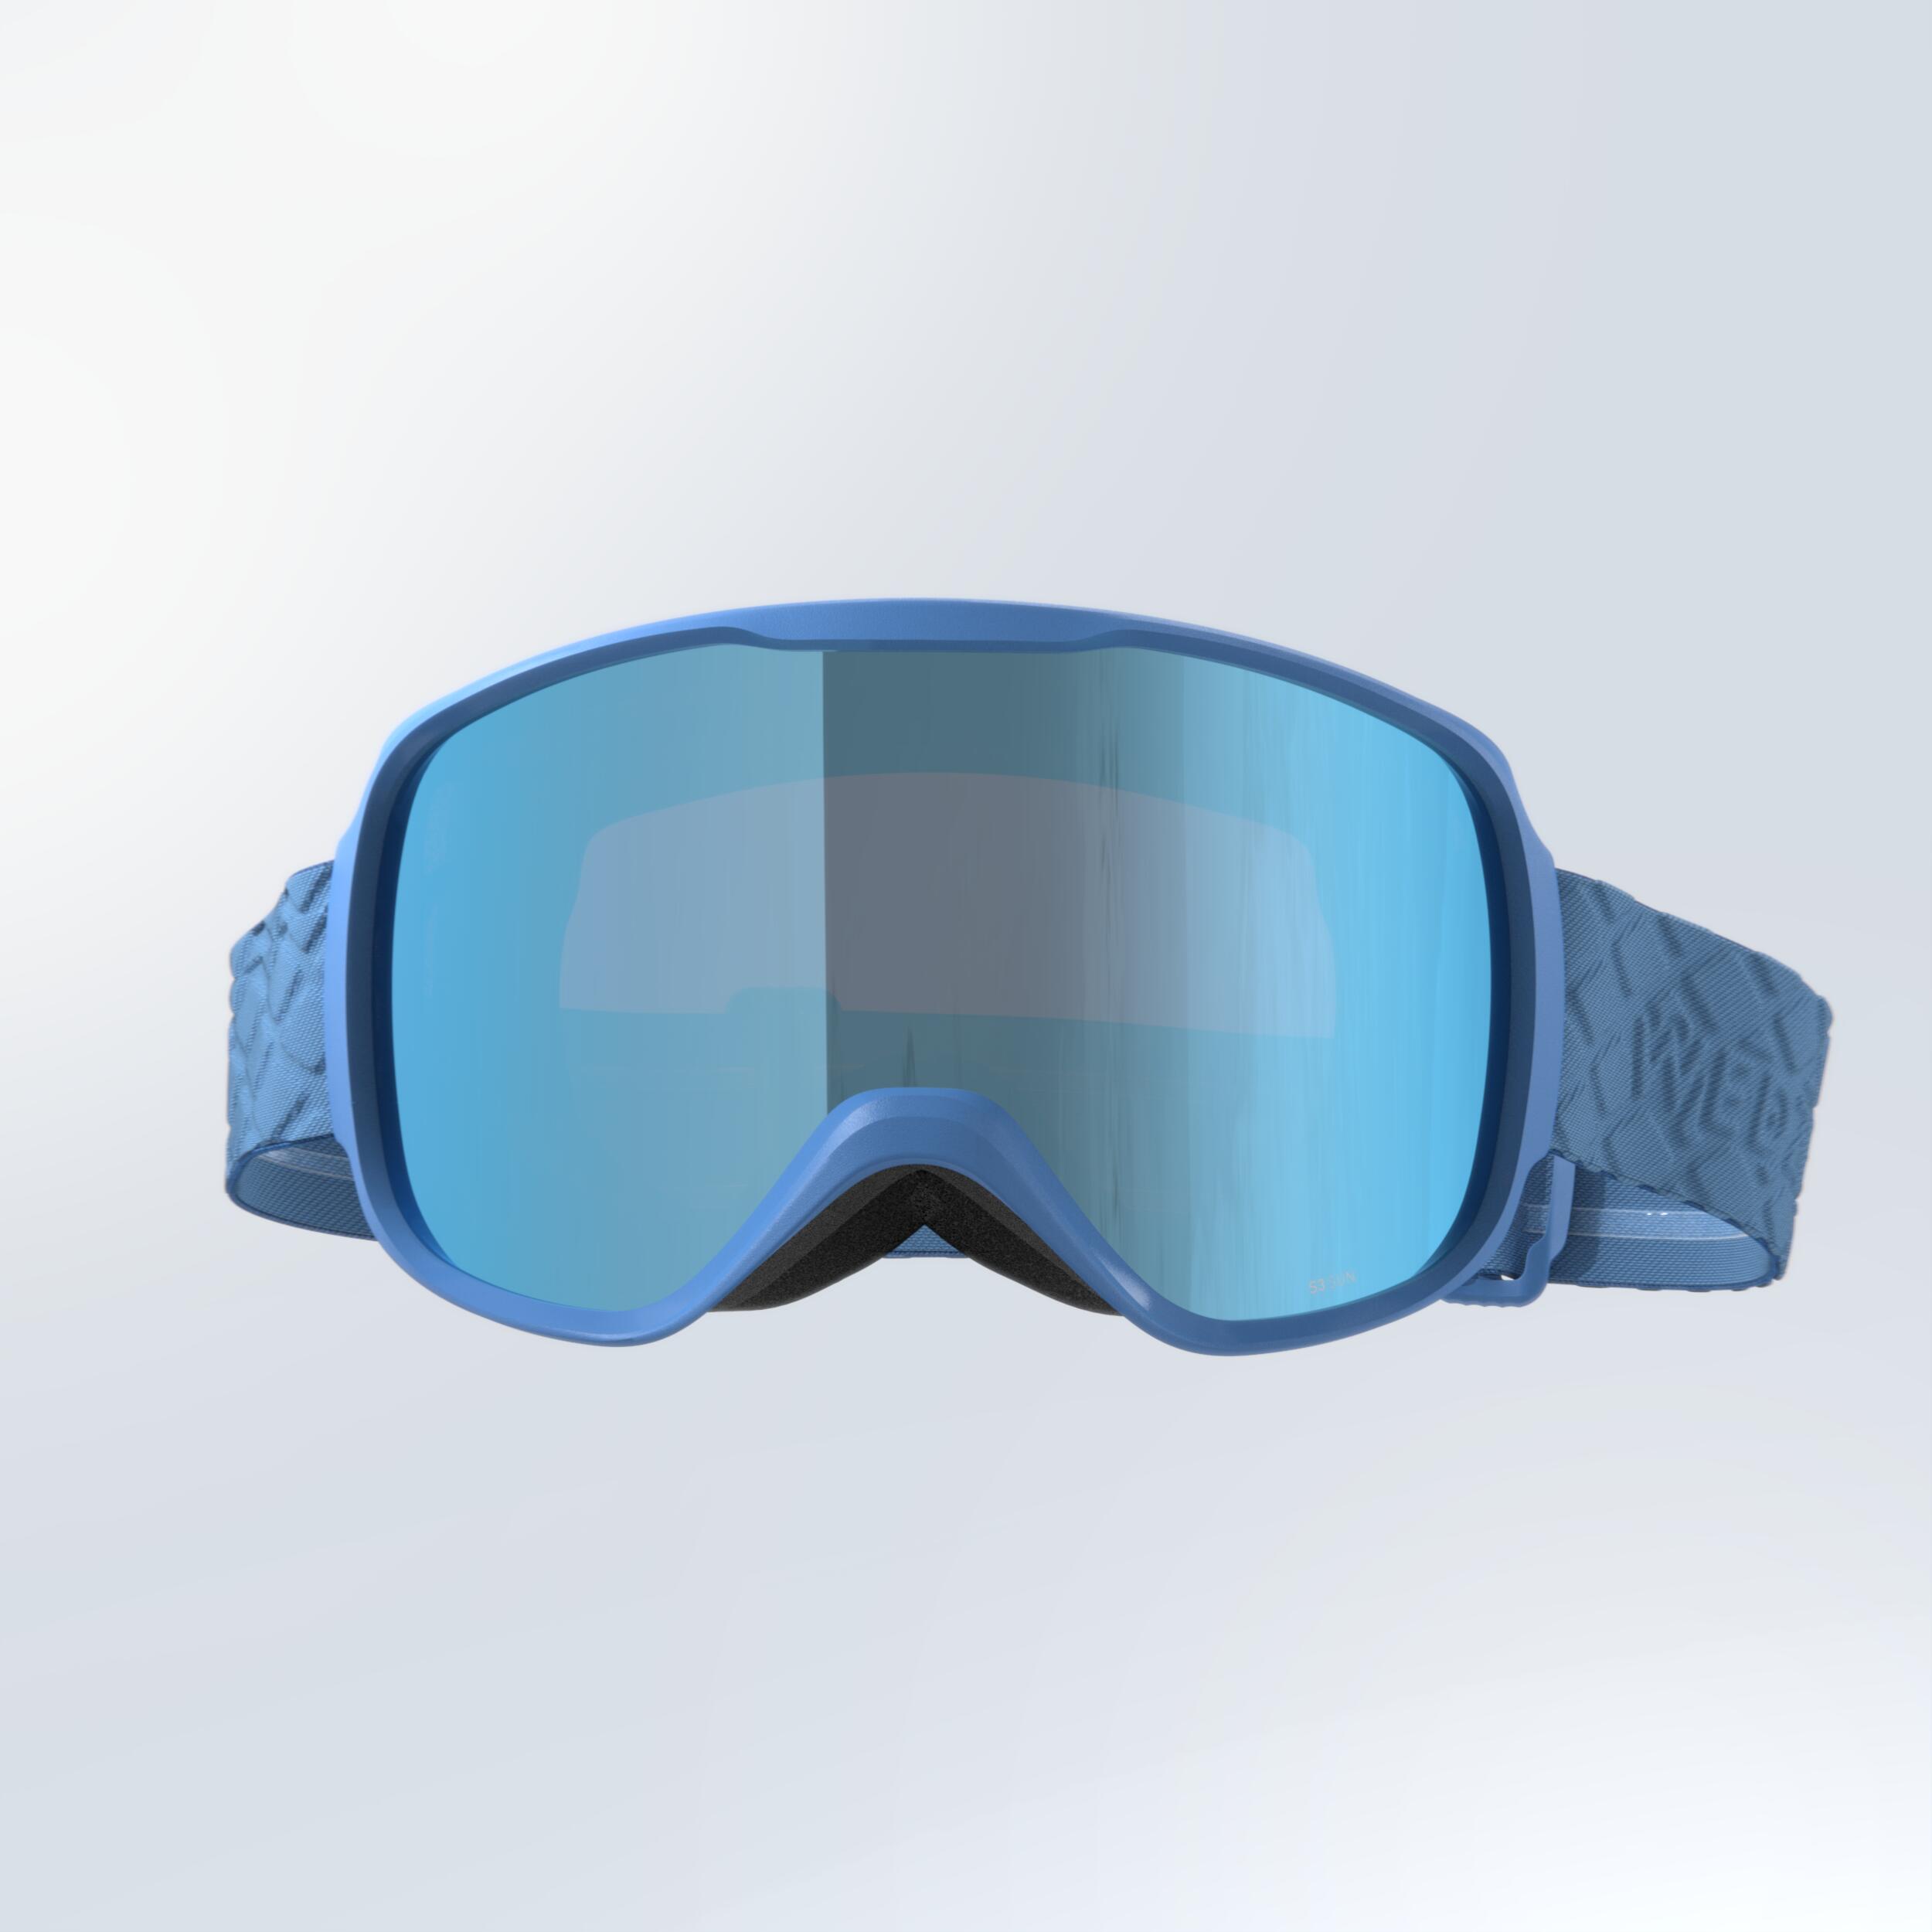 JUNIOR ADULT SKI AND SNOWBOARD GOOD WEATHER MASK - G 500 S3 - BLUE 2/4